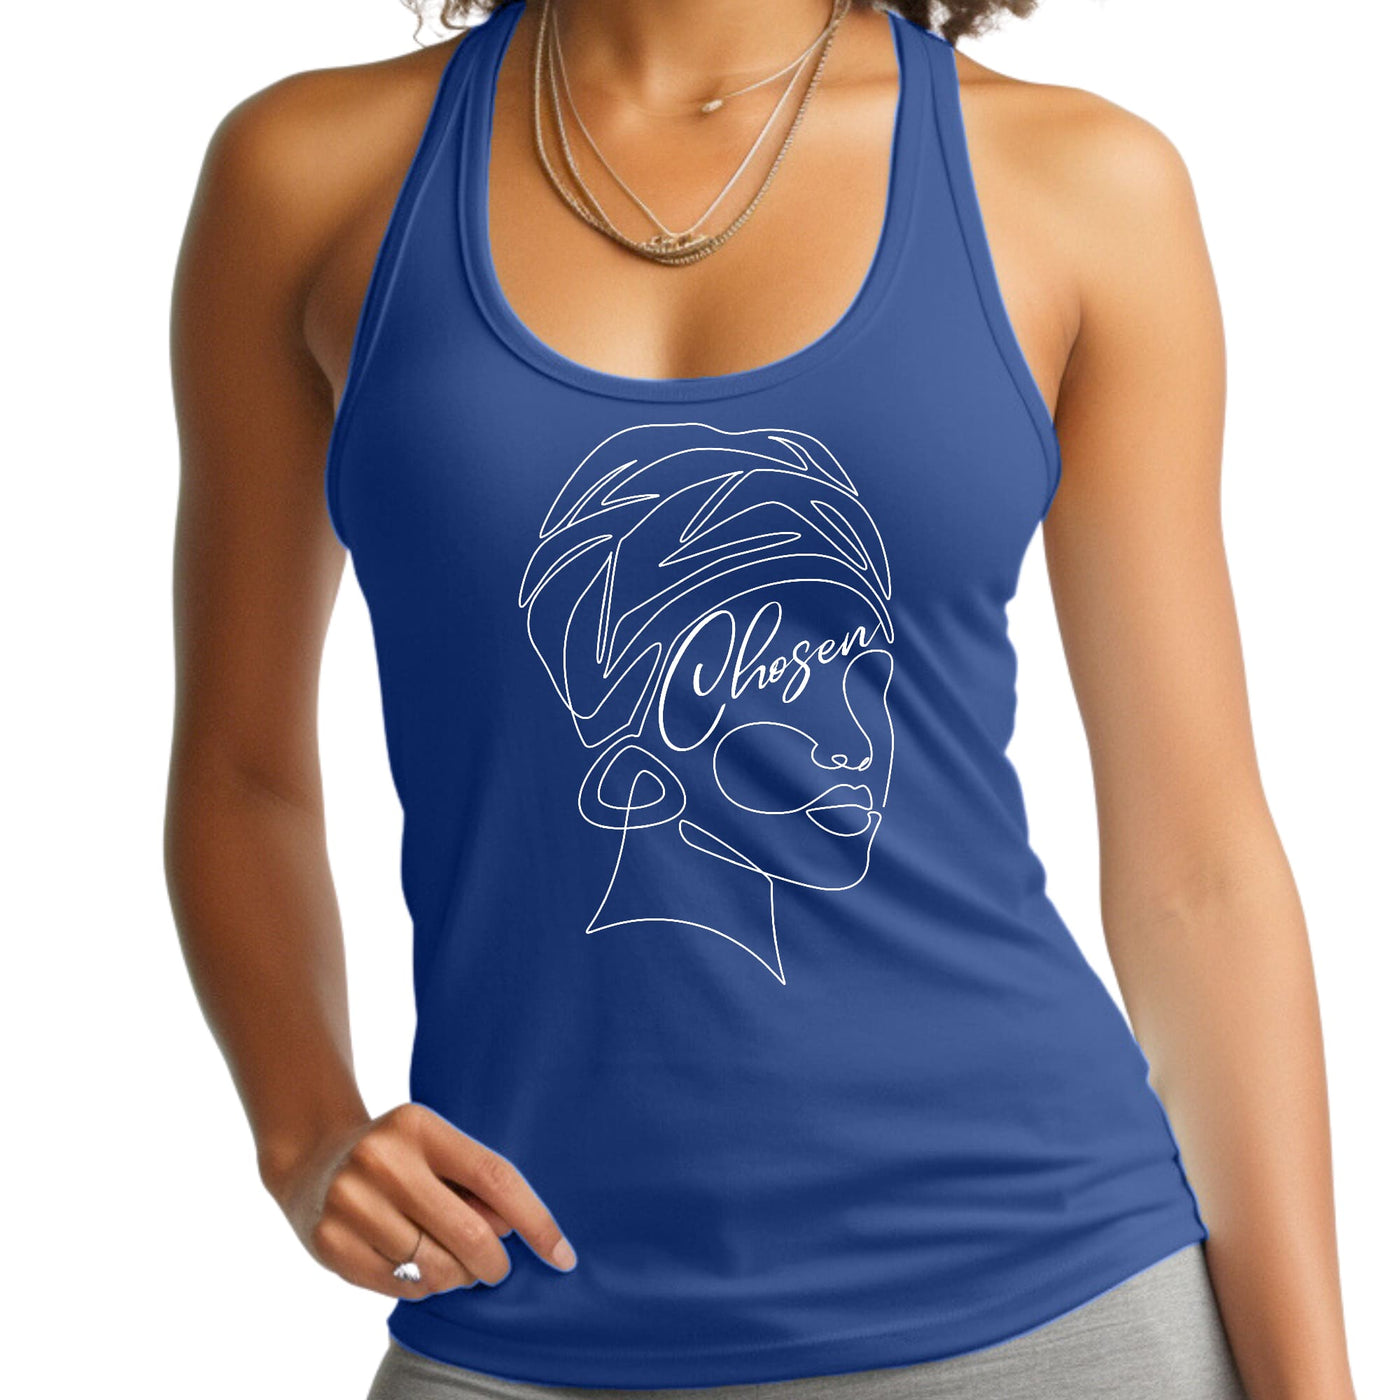 Womens Fitness Tank Top Graphic T-shirt Say It Soul - Line Art Woman, - Womens